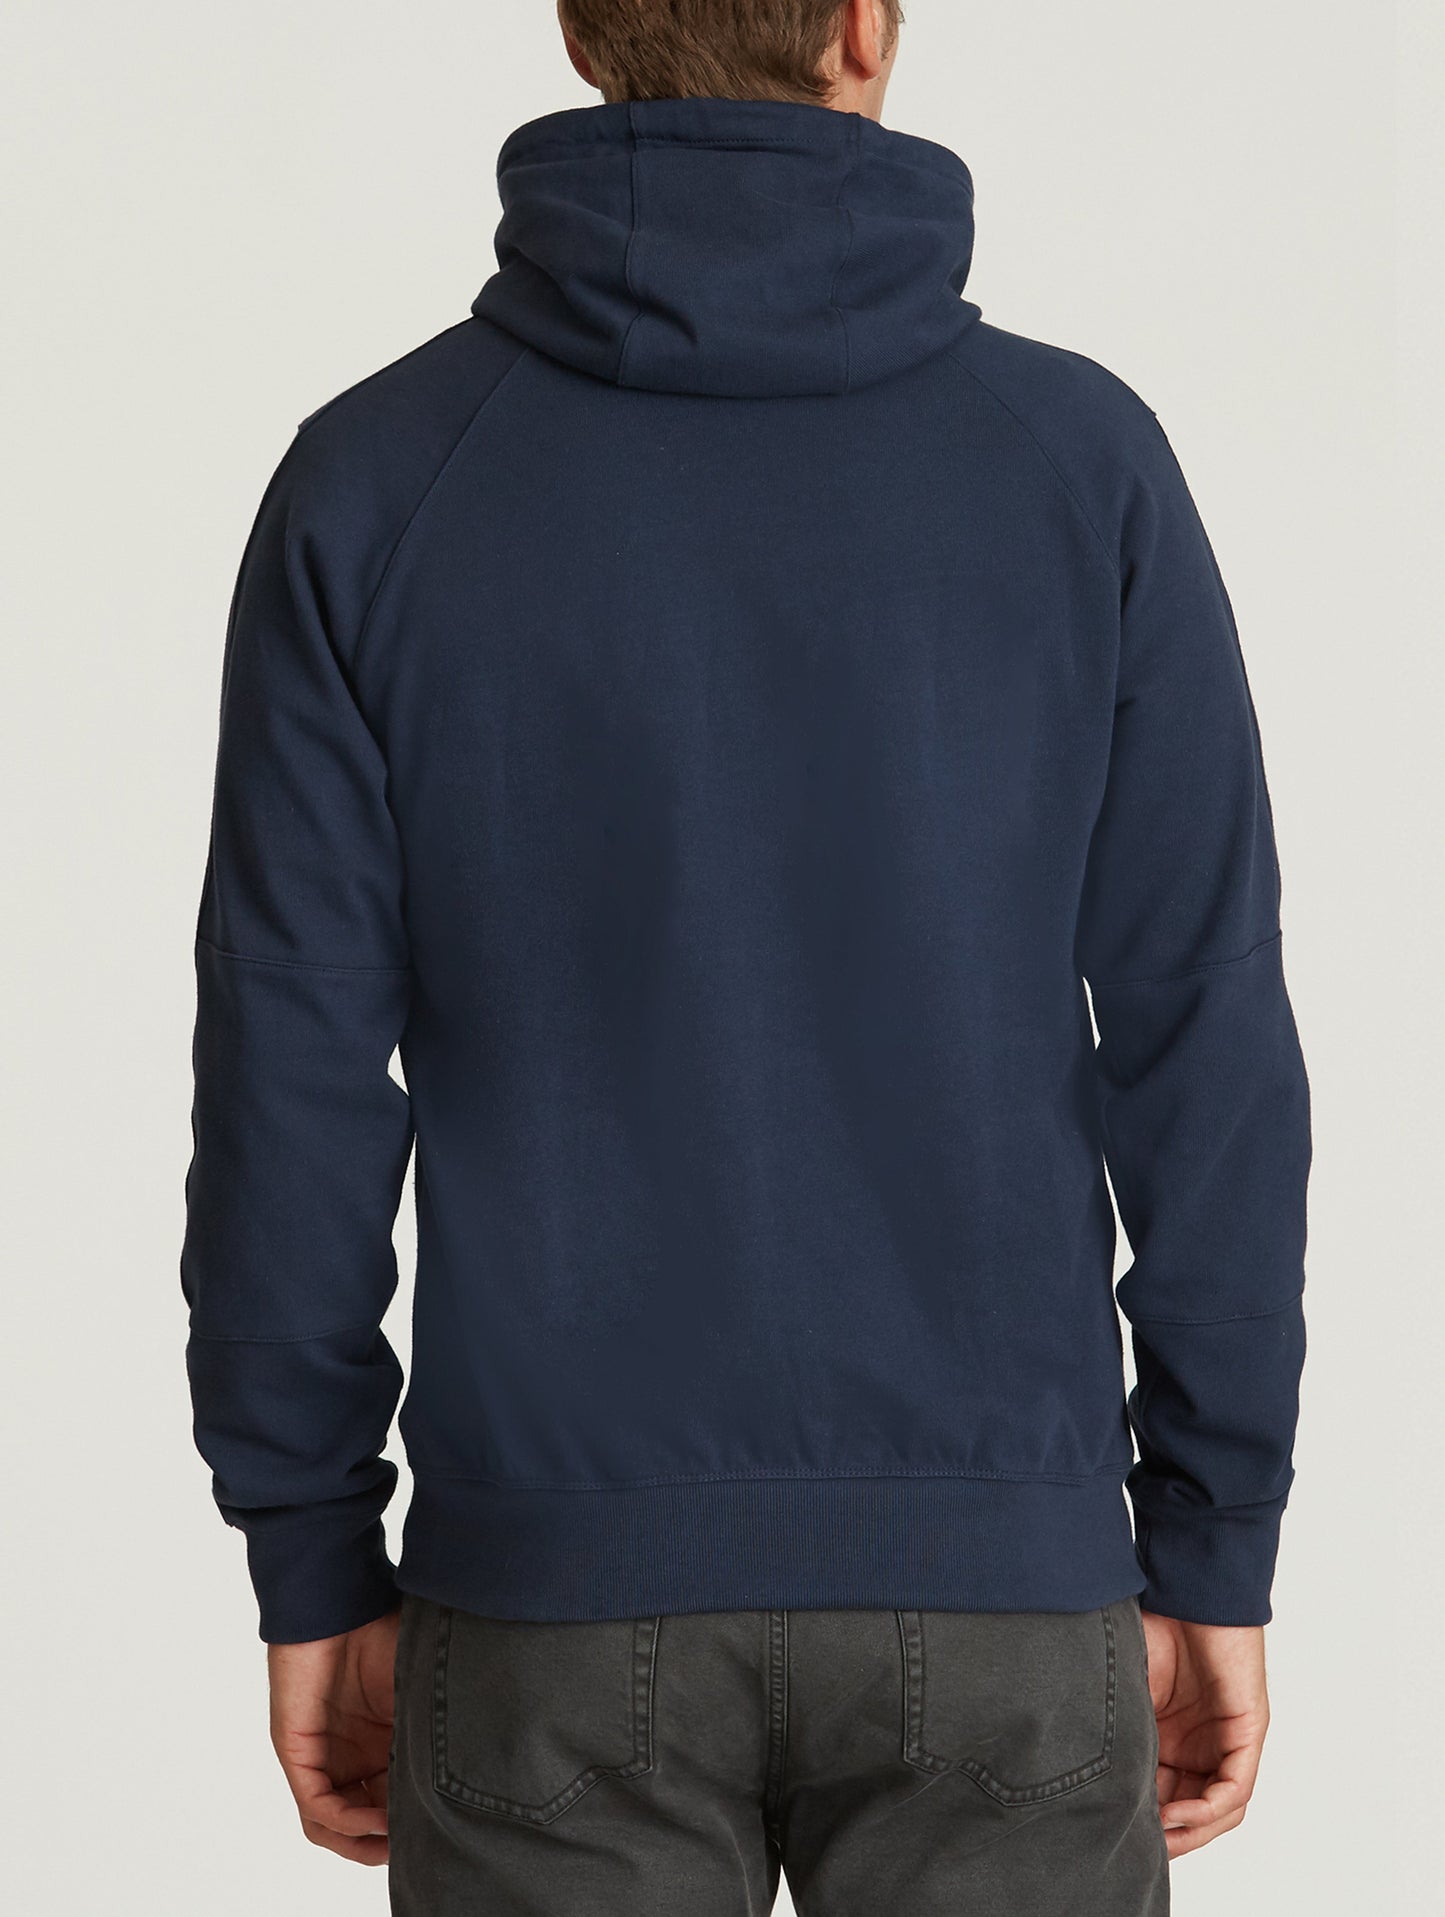 hoodie for men from Aether Apparel